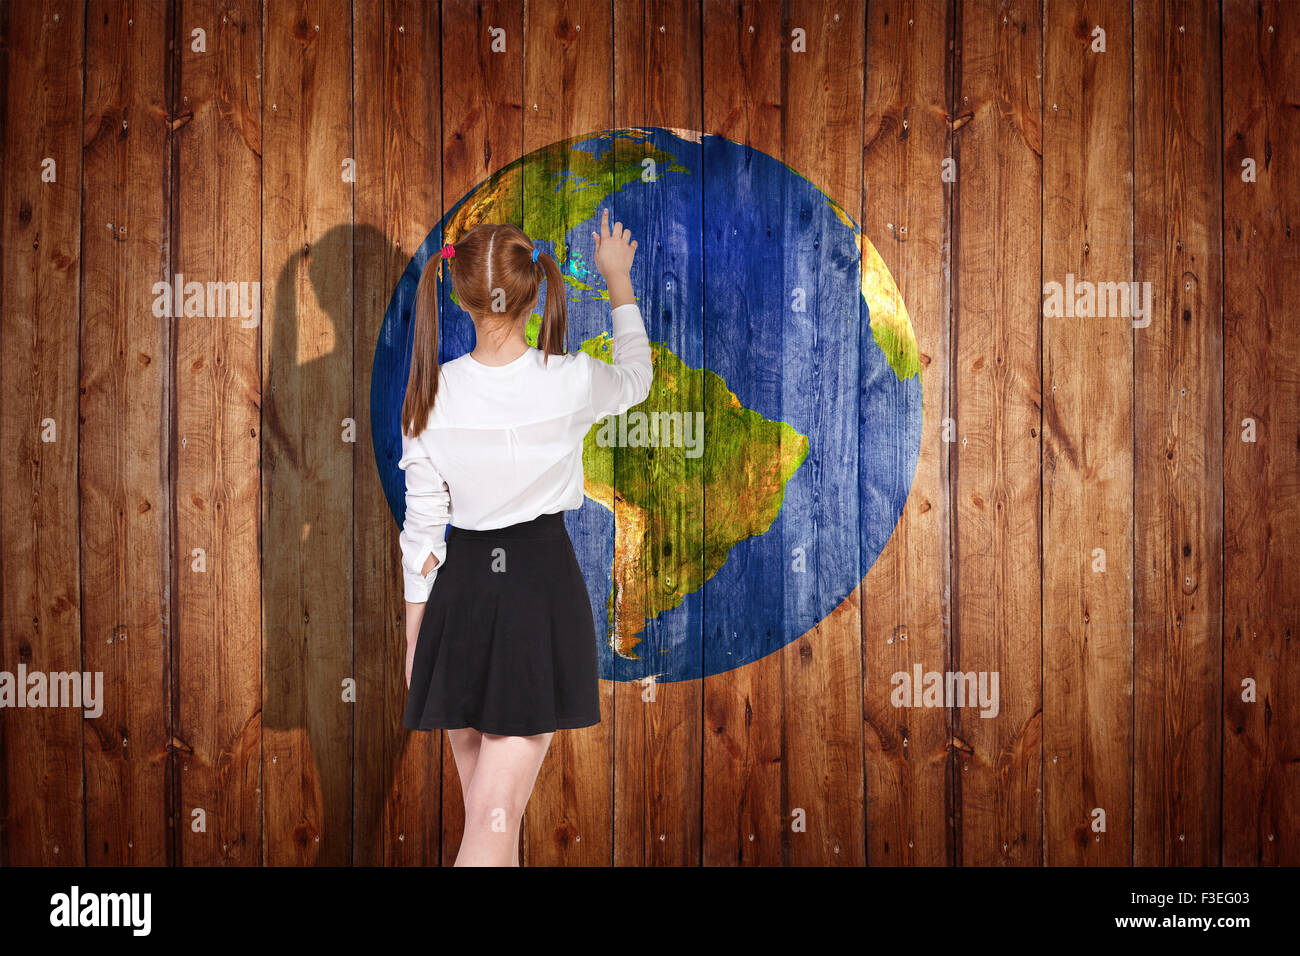 Earth  ball texture on  wood background Stock Photo